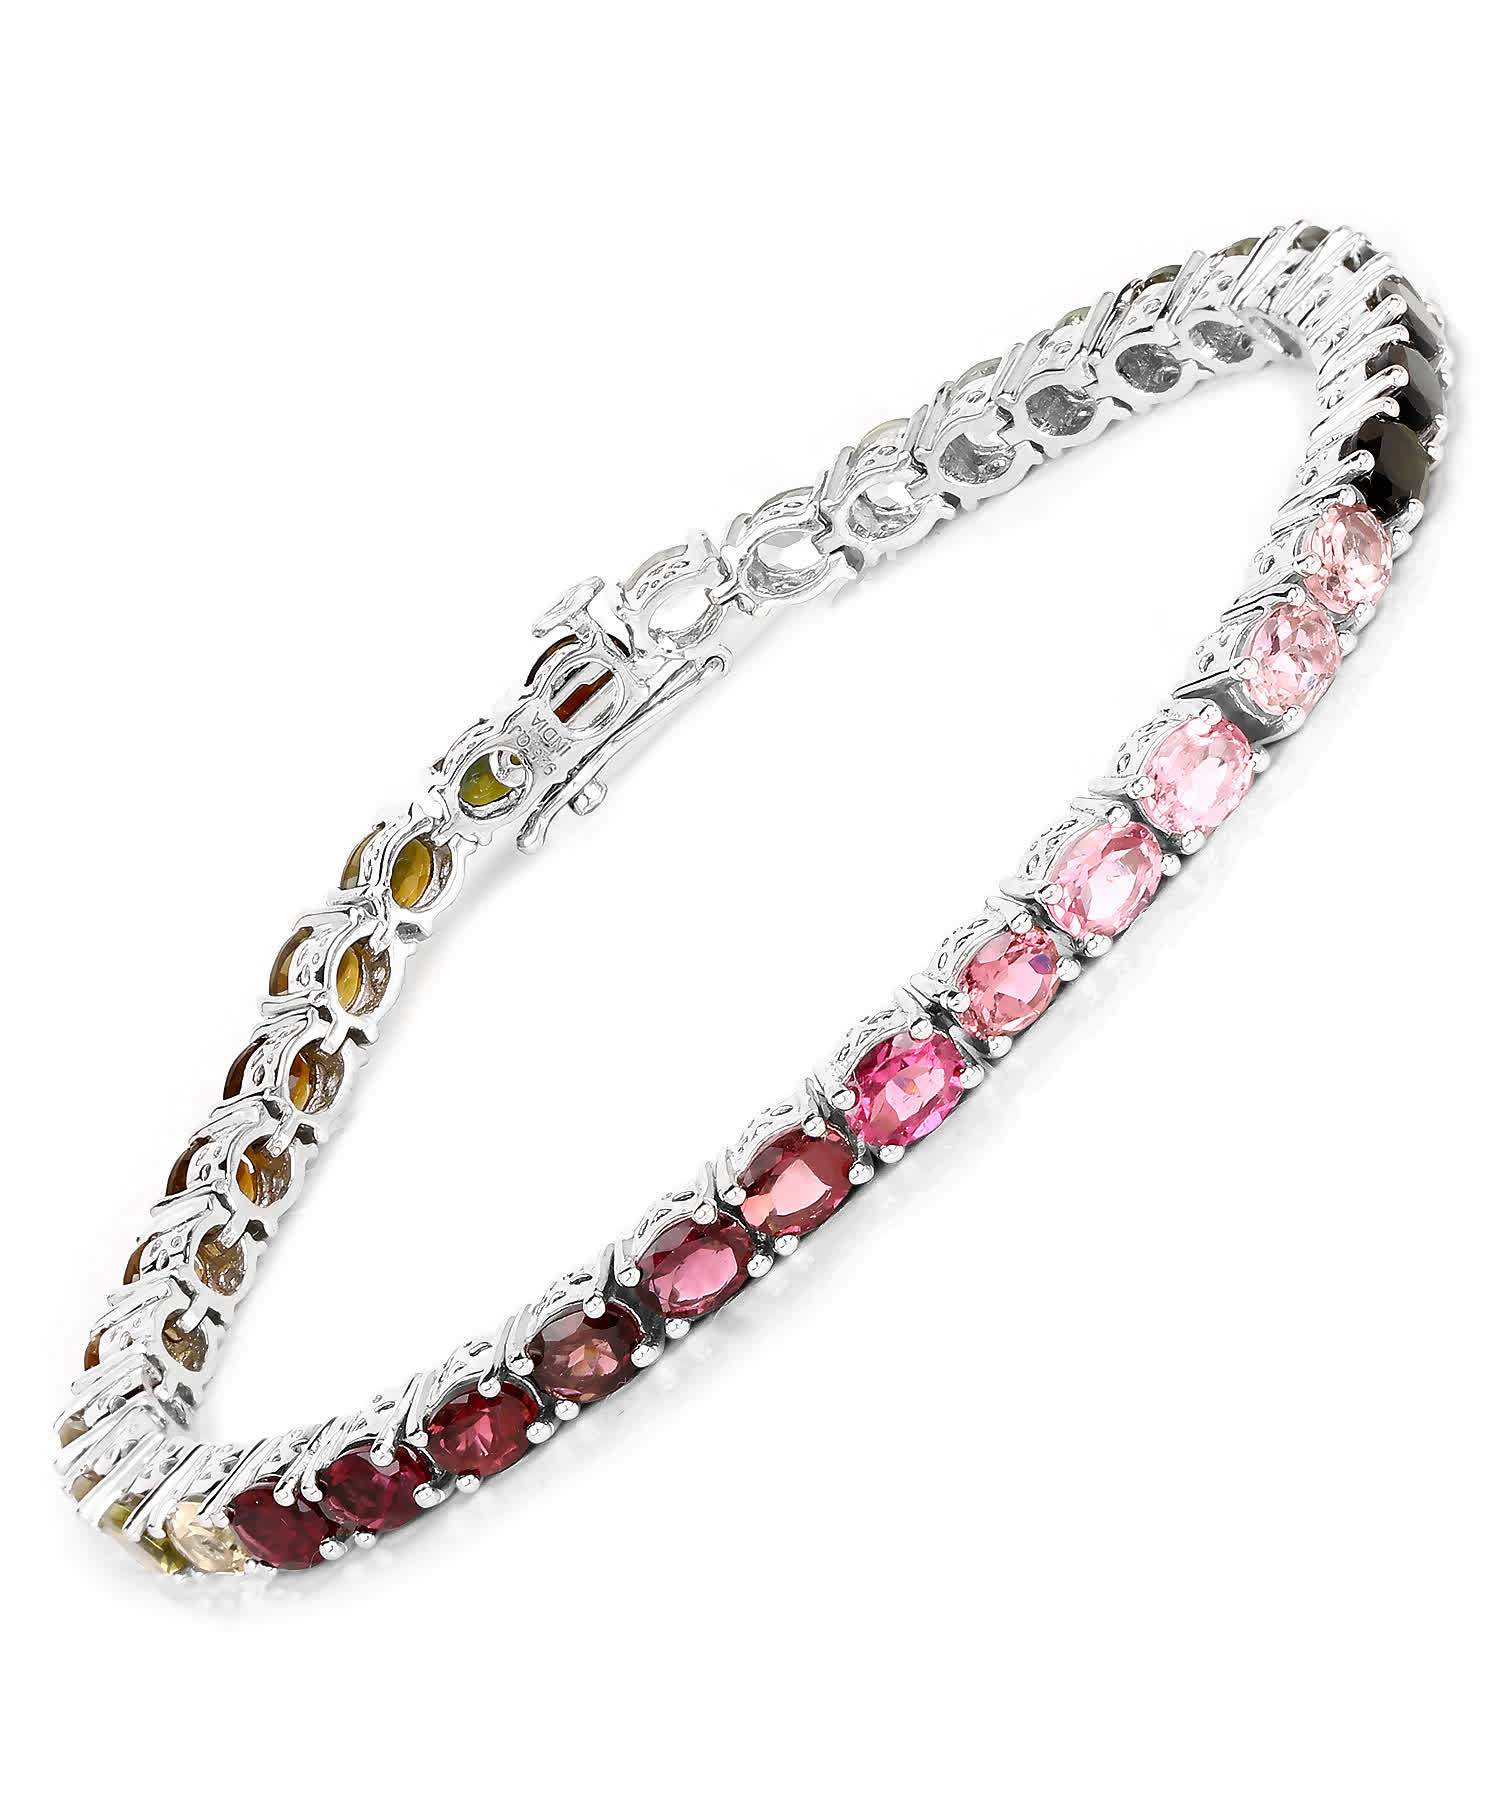 11.16ctw Natural Tourmaline Rhodium Plated 925 Sterling Silver Tennis Bracelet View 1